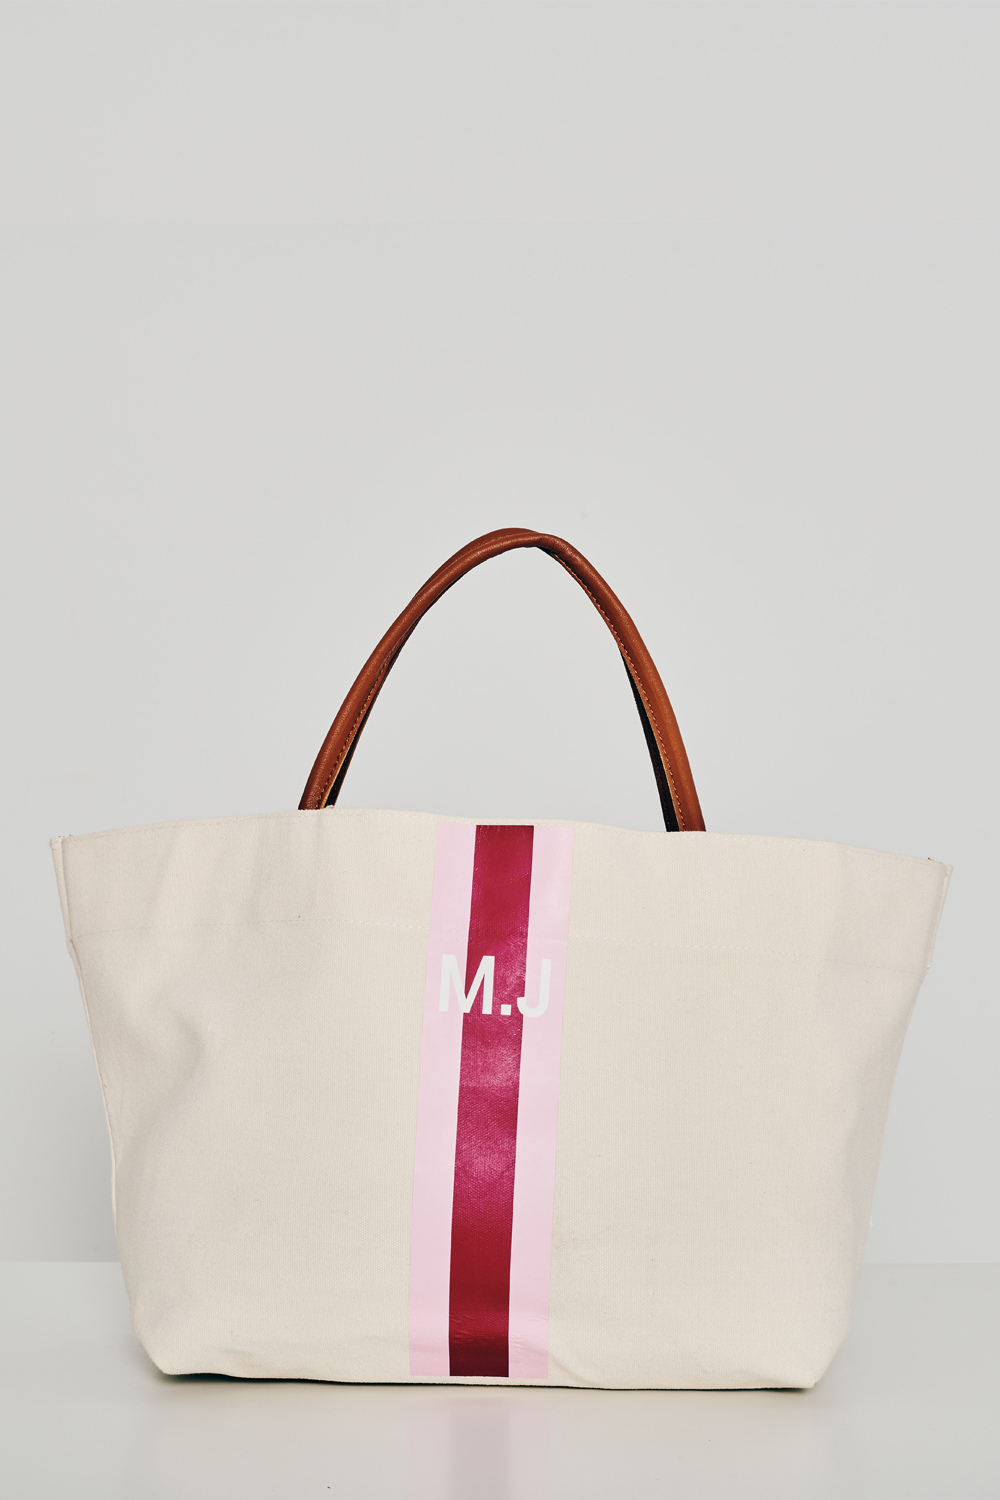 As Is - Petra Classic Canvas Tote Bag with Initials (Pink Fuchsia)